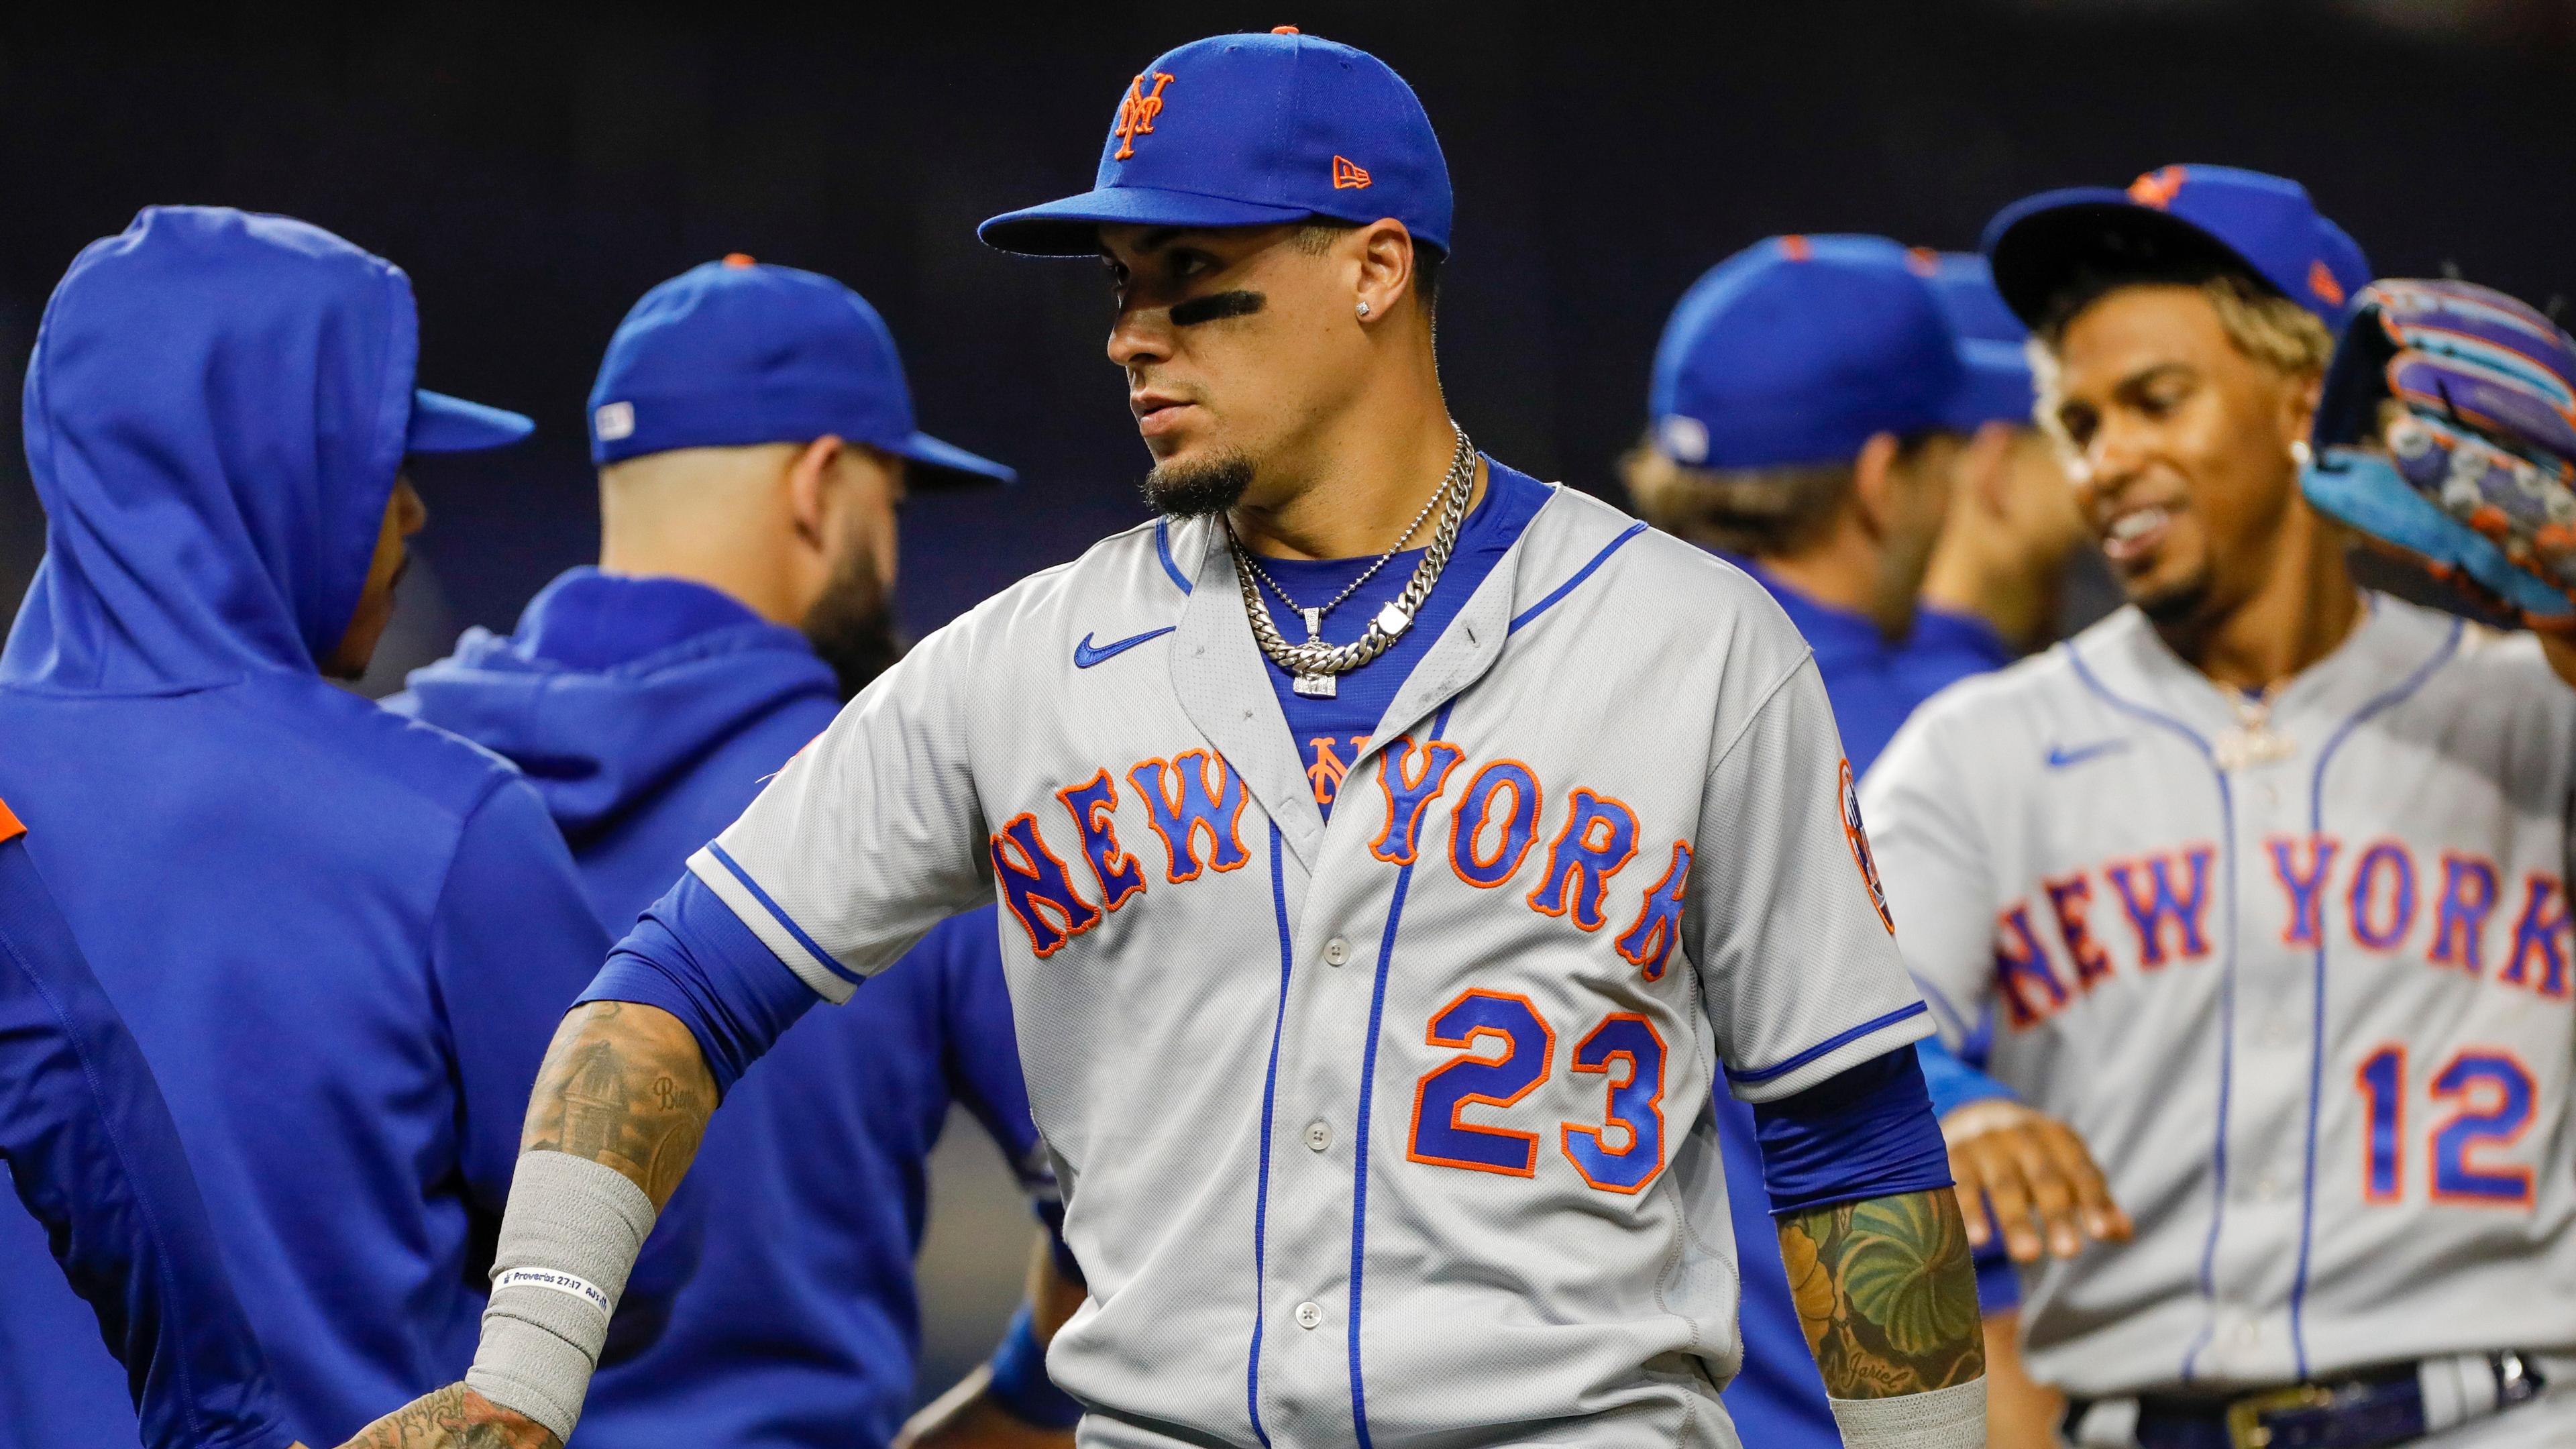 Sep 7, 2021; Miami, Florida, USA; New York Mets second baseman Javier Baez (23) celebrates with teammates after winning the game 9-4 against the Miami Marlins at loanDepot Park. / Sam Navarro-USA TODAY Sports